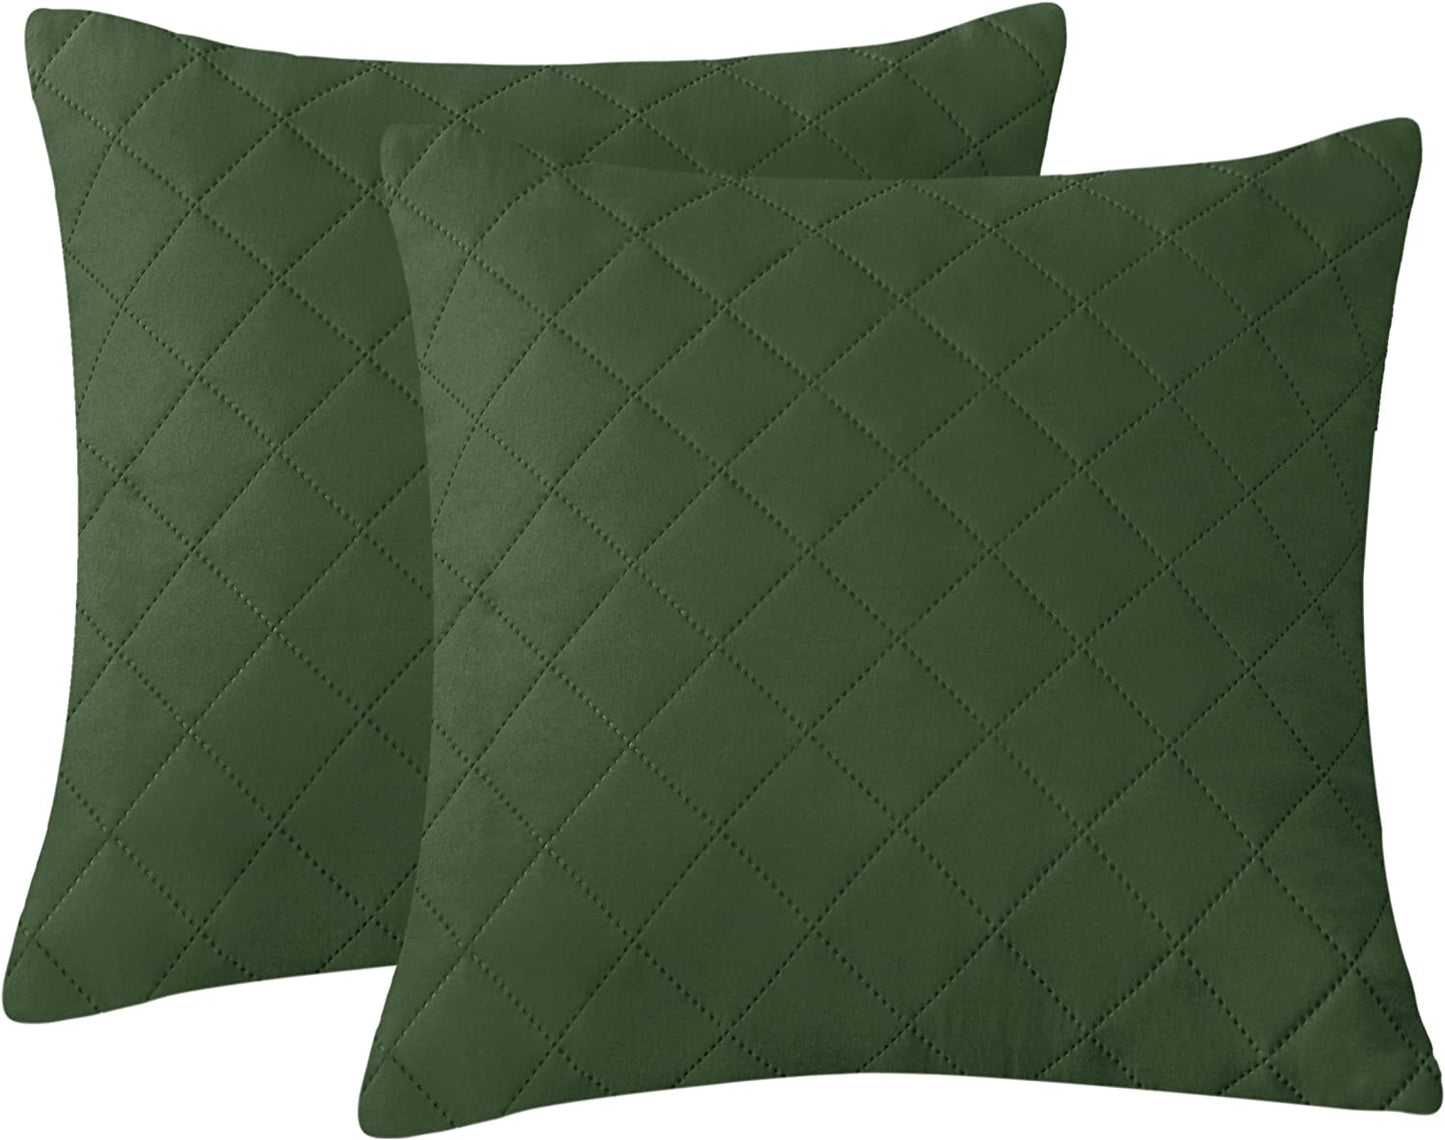 QUILTED CUSHION COVER SQUARE PATTERN 16 X 16 INCHES - GREEN